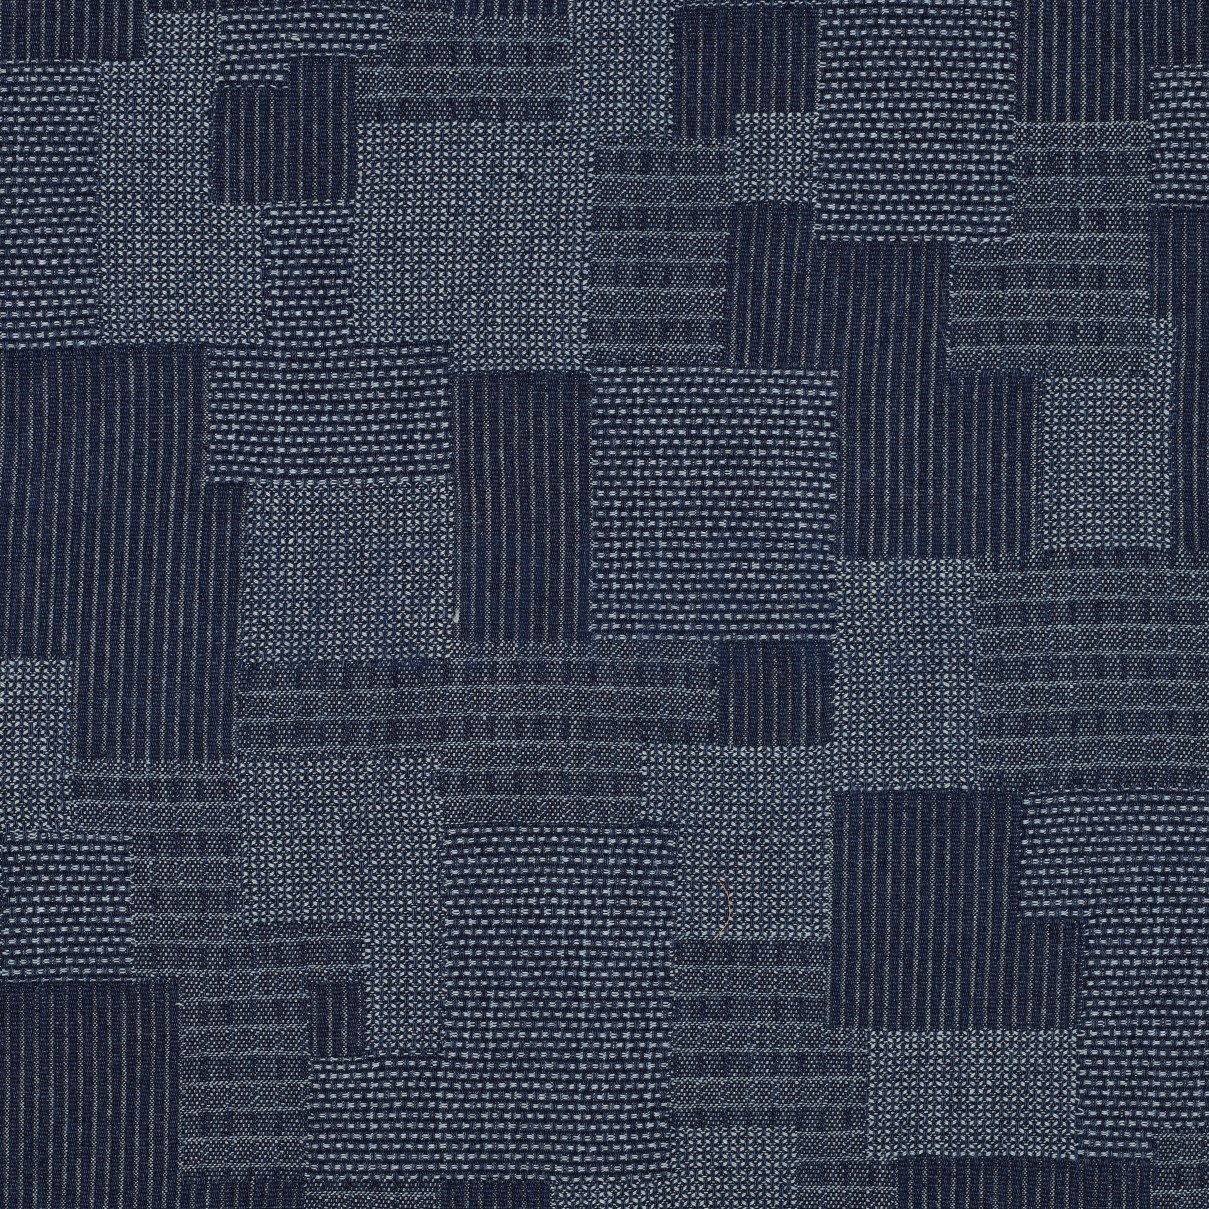 JEANS JACQUARD JEANS (high resolution)